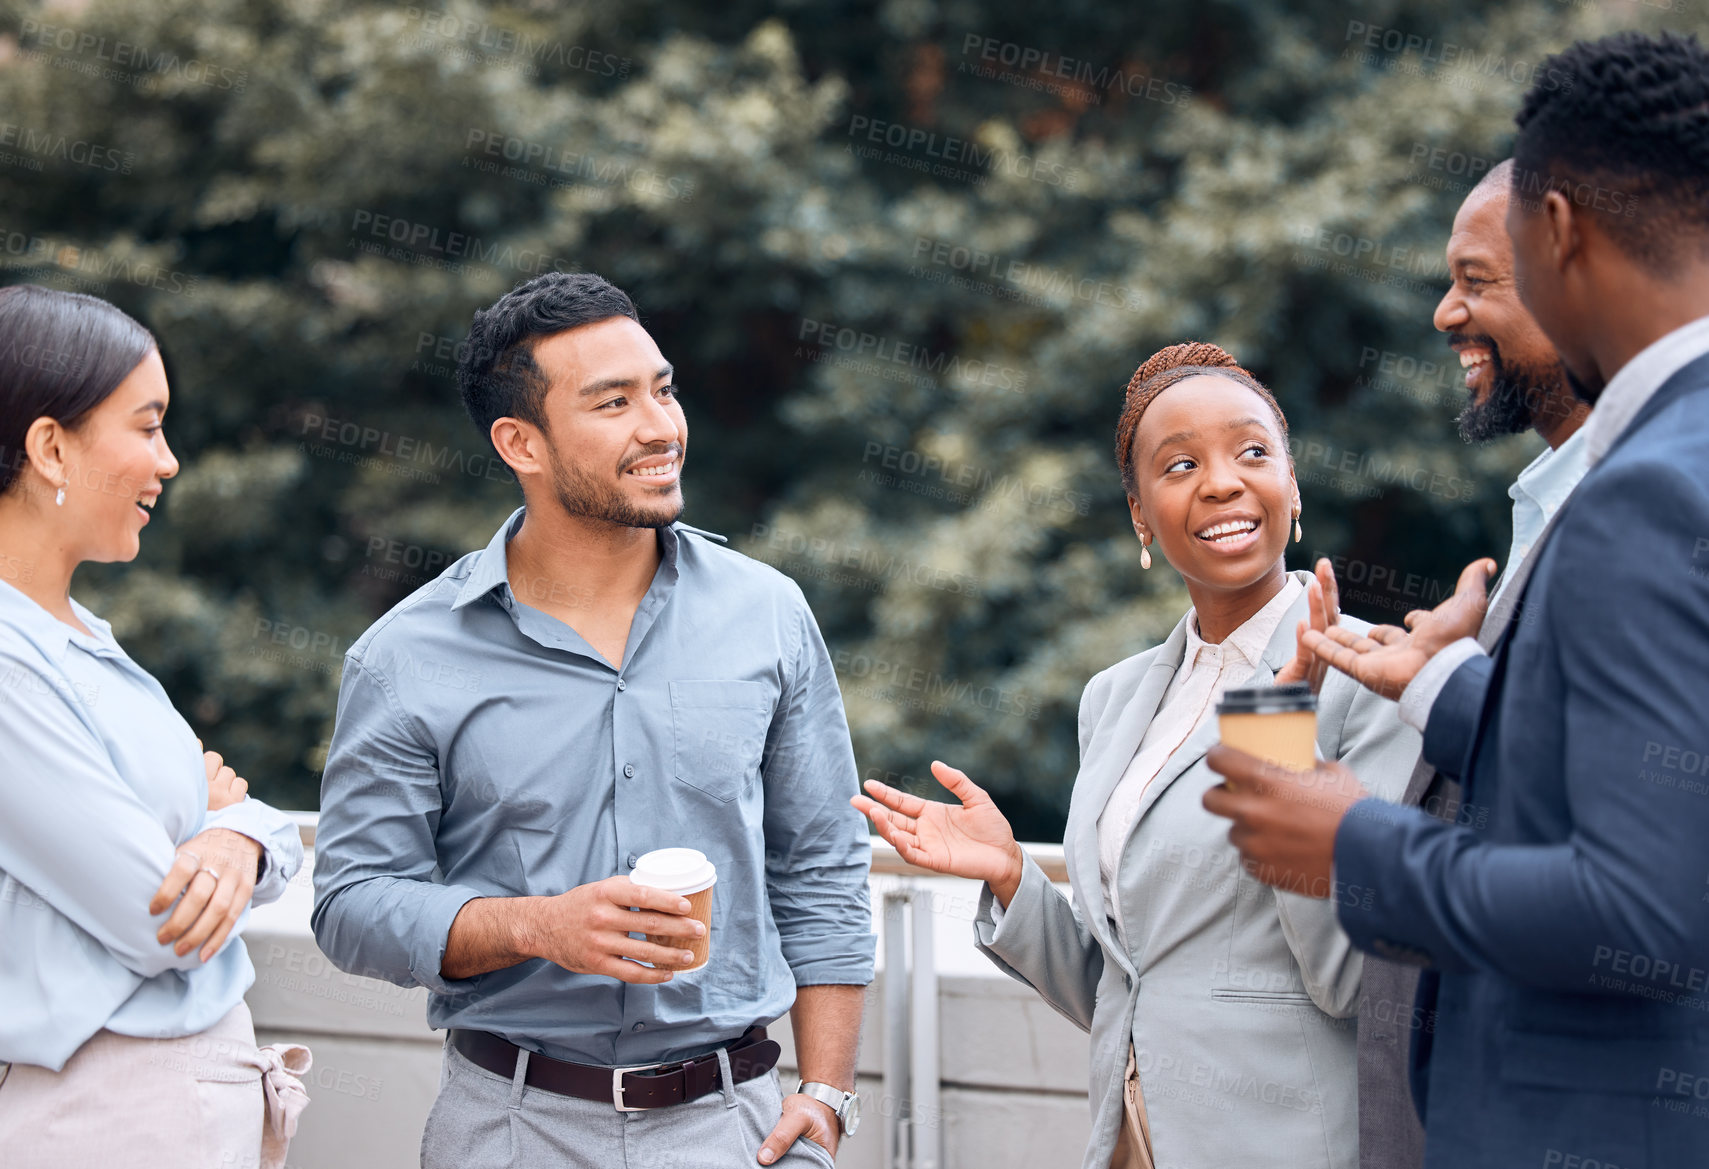 Buy stock photo Shot of a group of businesspeople outside having coffee and conversation